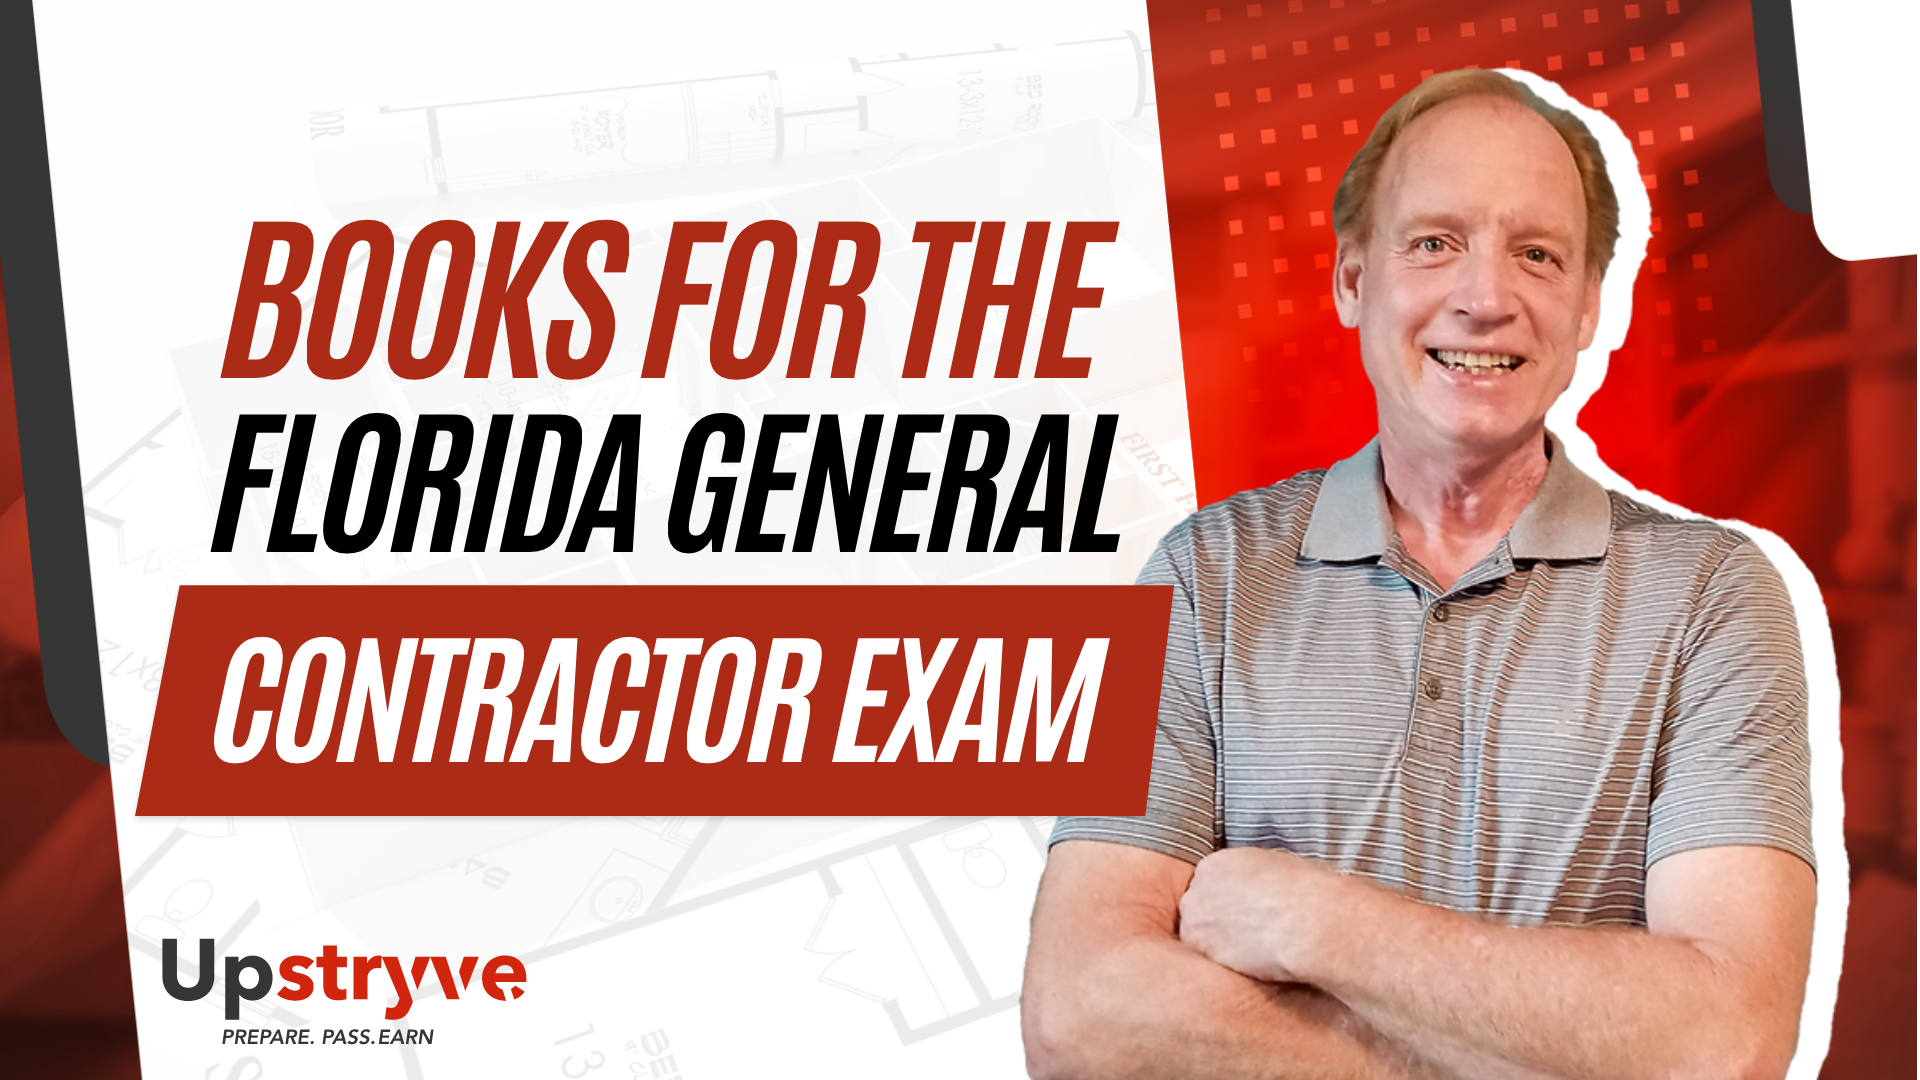 Becoming a General Contractor in the state of Florida requires a few different steps. In today's video we chartt with Upstyrve mentor and Florida Contractor Jack Sheffield. He gives us some key insights on the books required for the Florida General Contractor License Exam.